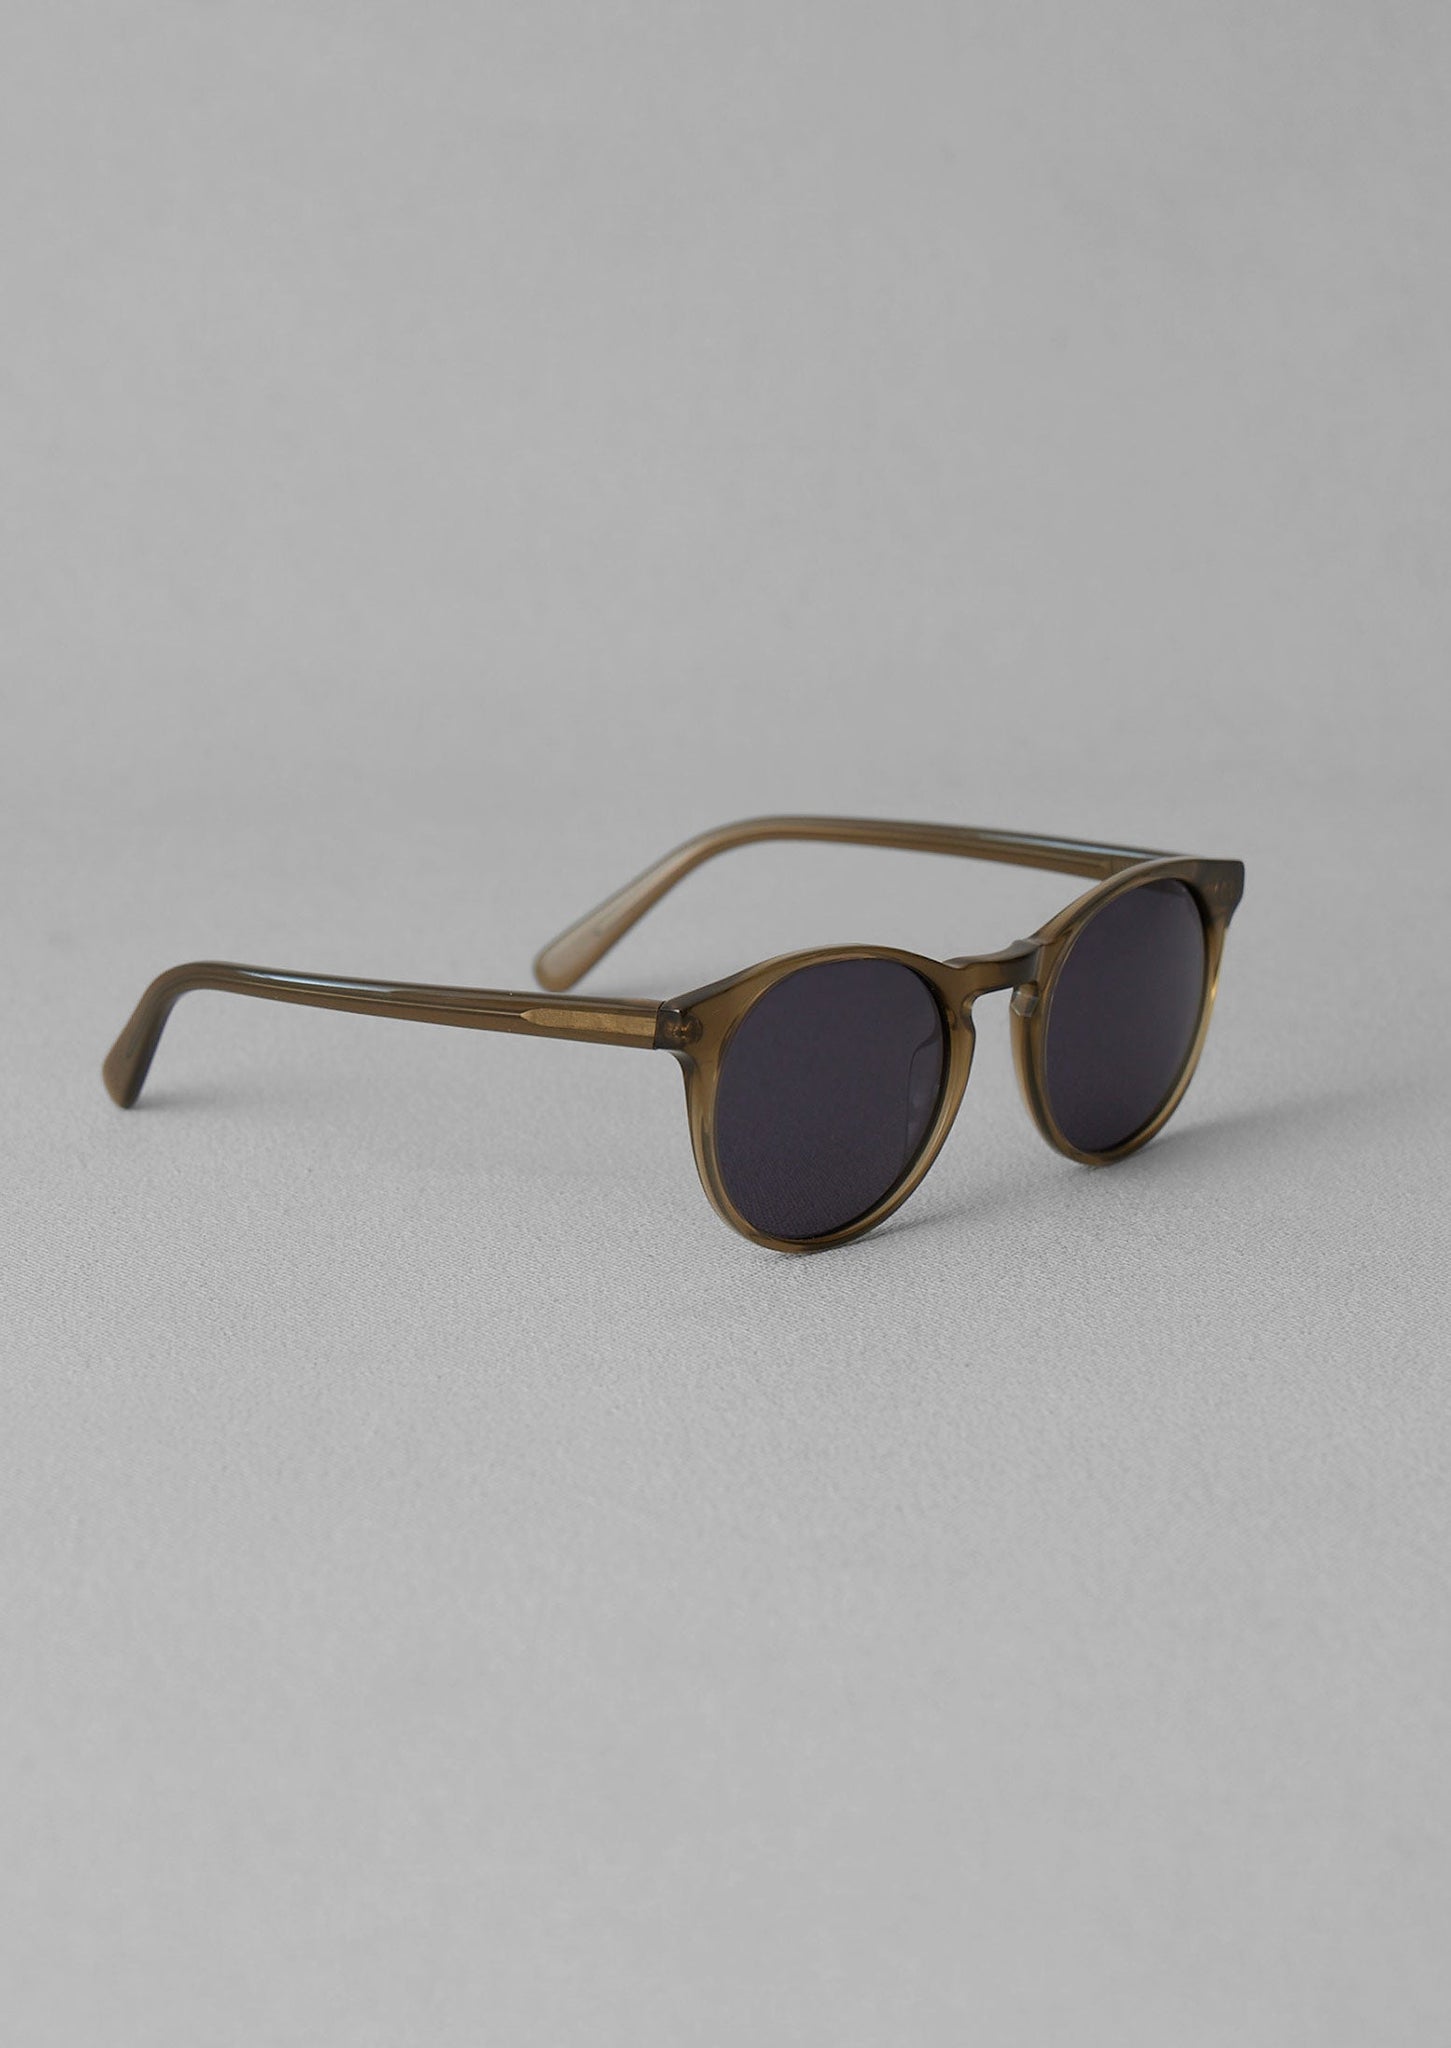 Finlay and Co Percy Sunglasses | Olive